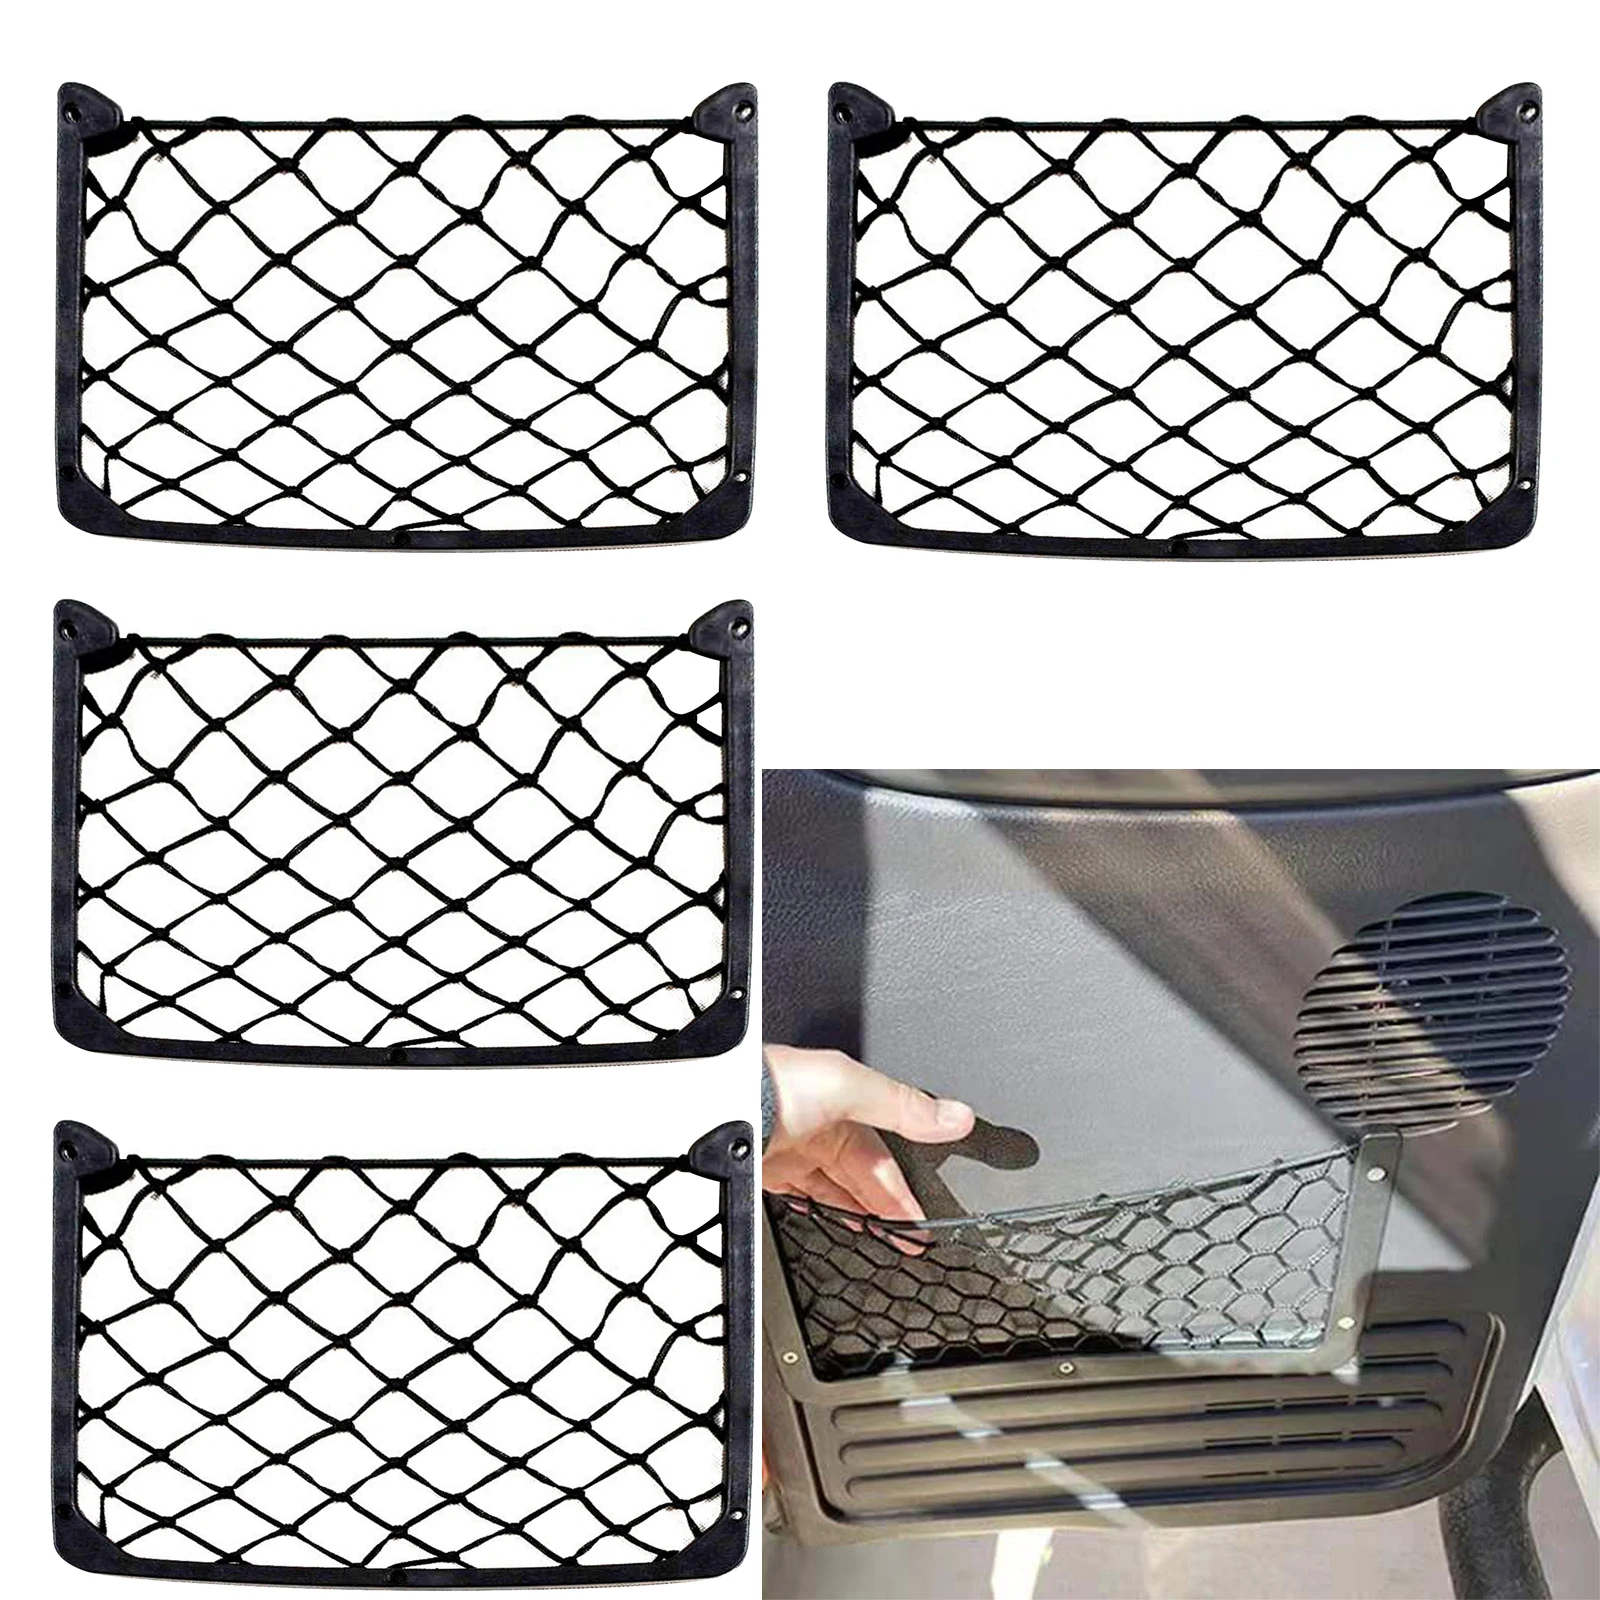 Car Storage Net Large Size ABS Plastic Netting Bag for Car Frame Stretch Mesh Net Universal Cargo with Screws for RV Car Trunk 5 meter strong fixation double sided tape universal high tack tapes with fiberglass mesh heavy duty sticky resistente clear tape